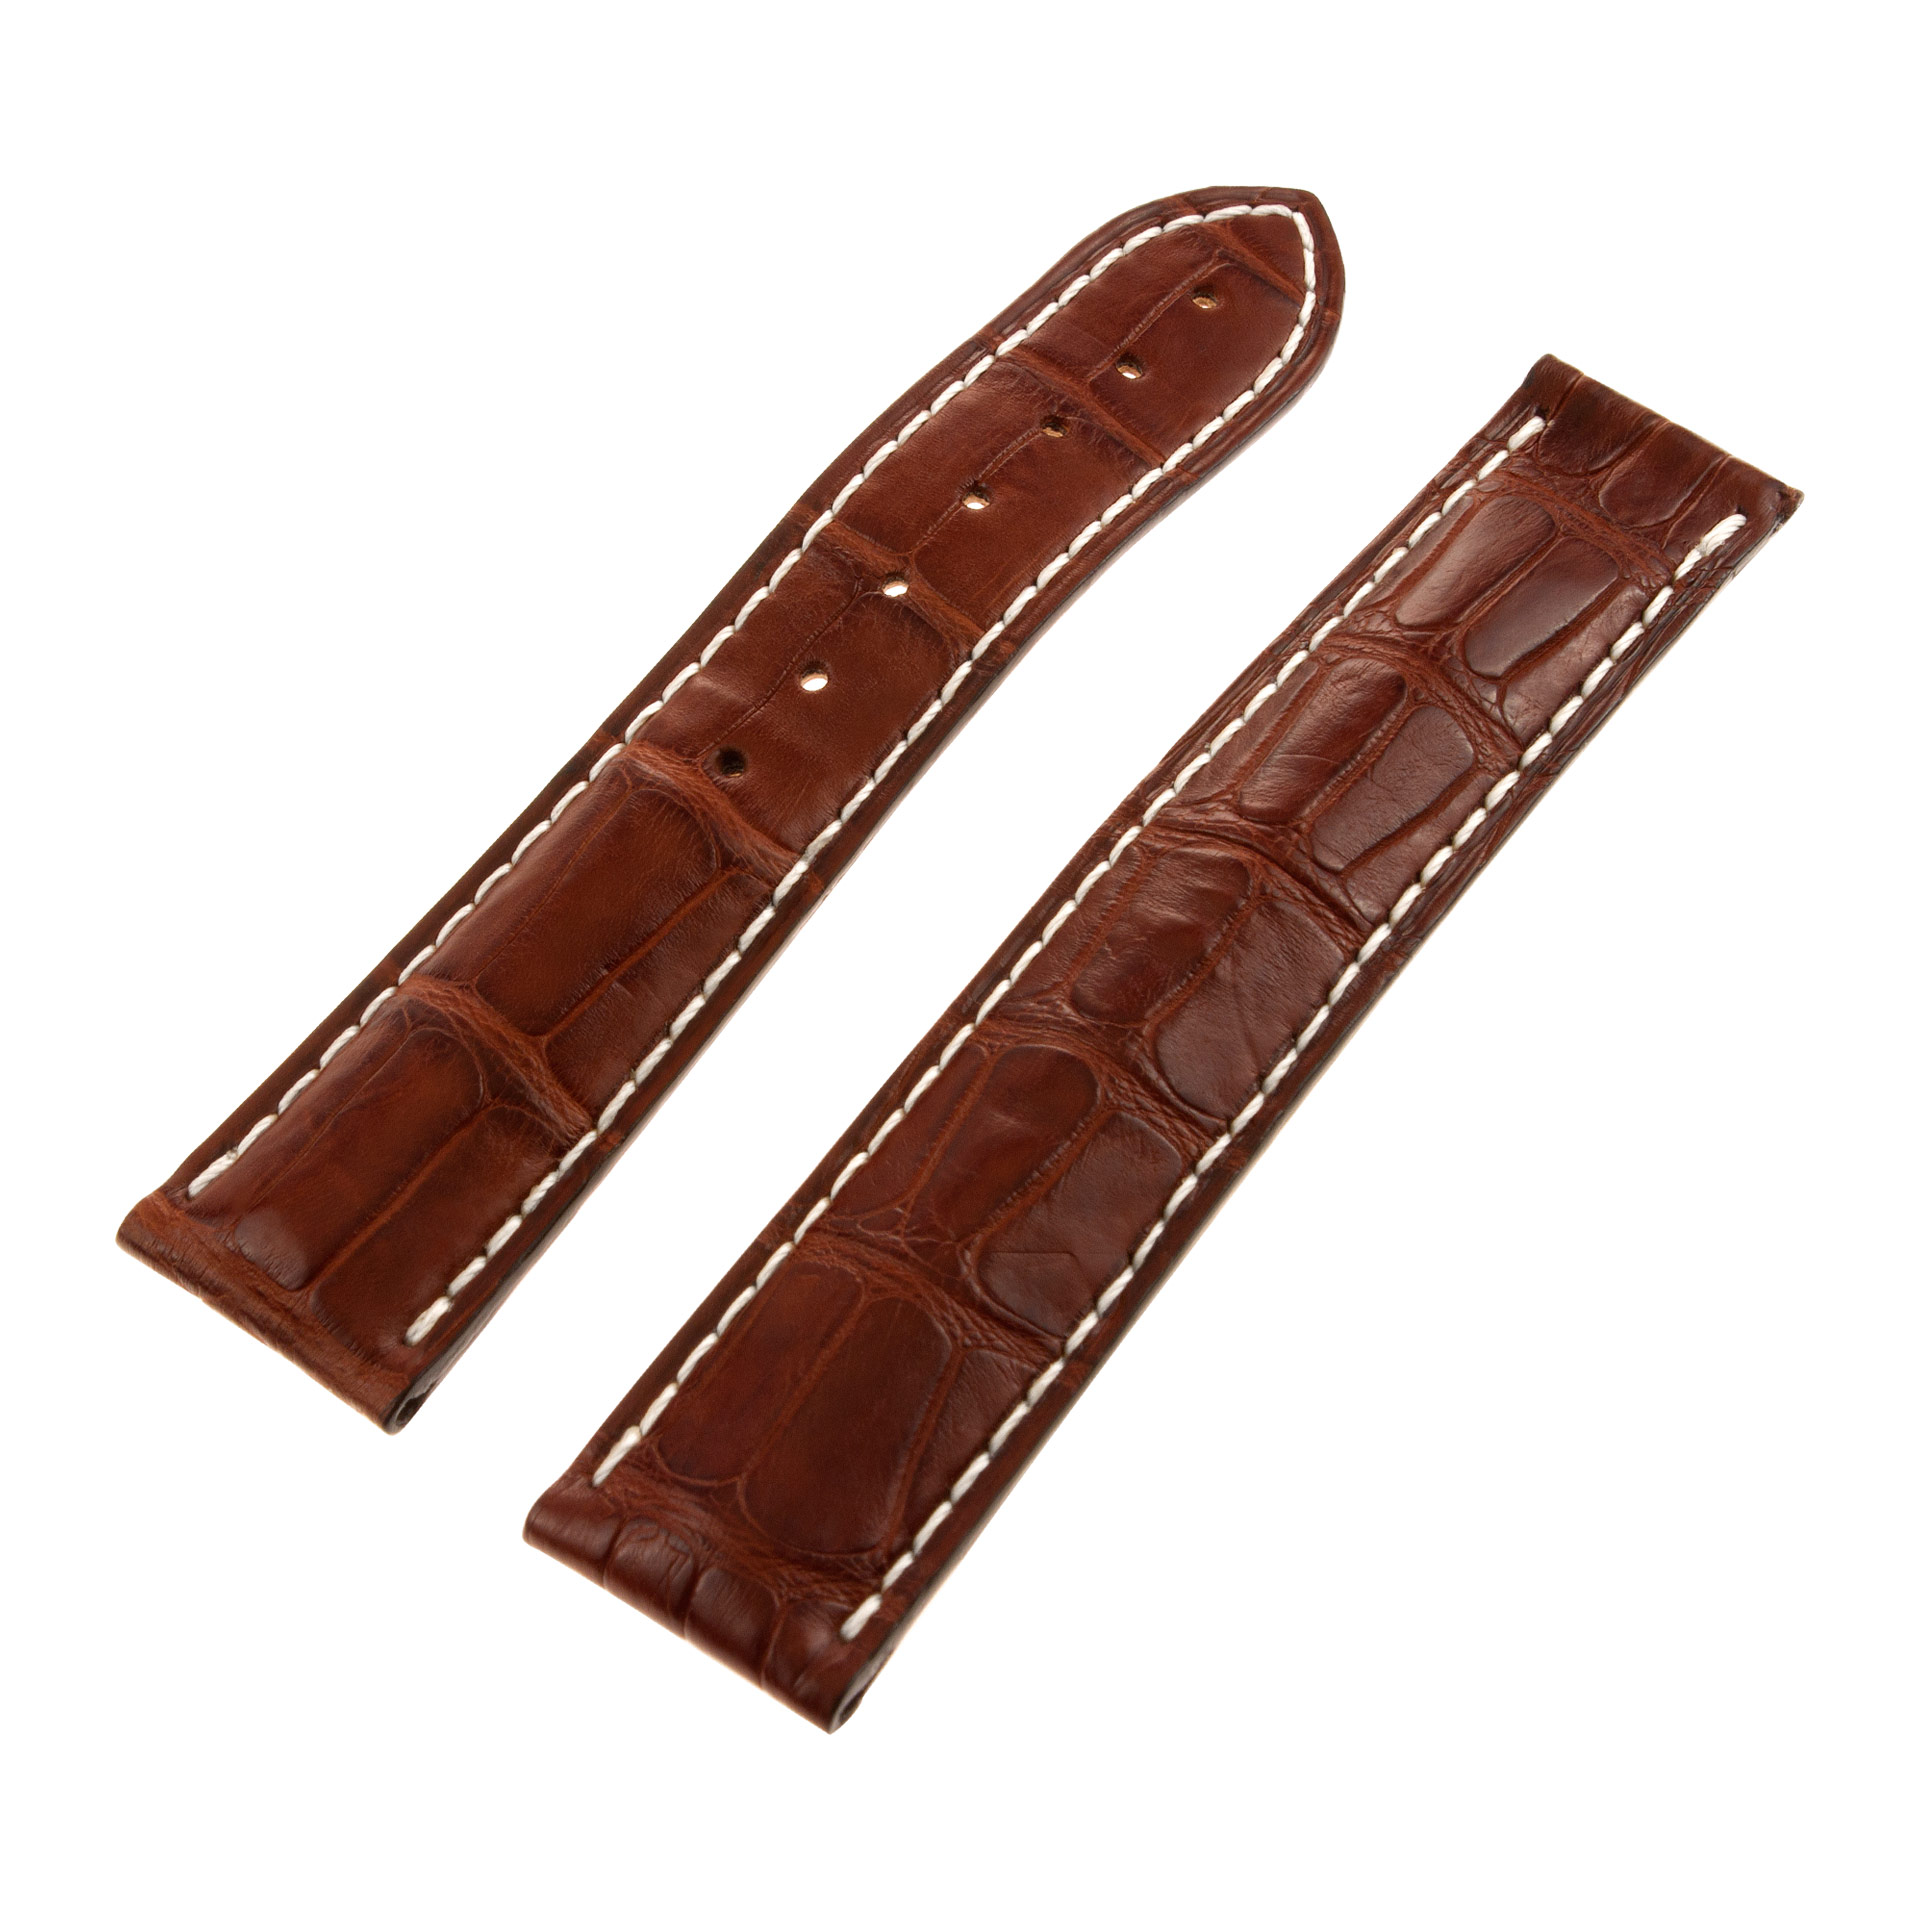 Omega brown alligator with white stitching for deployment buckle (98000079) (21 x 18)